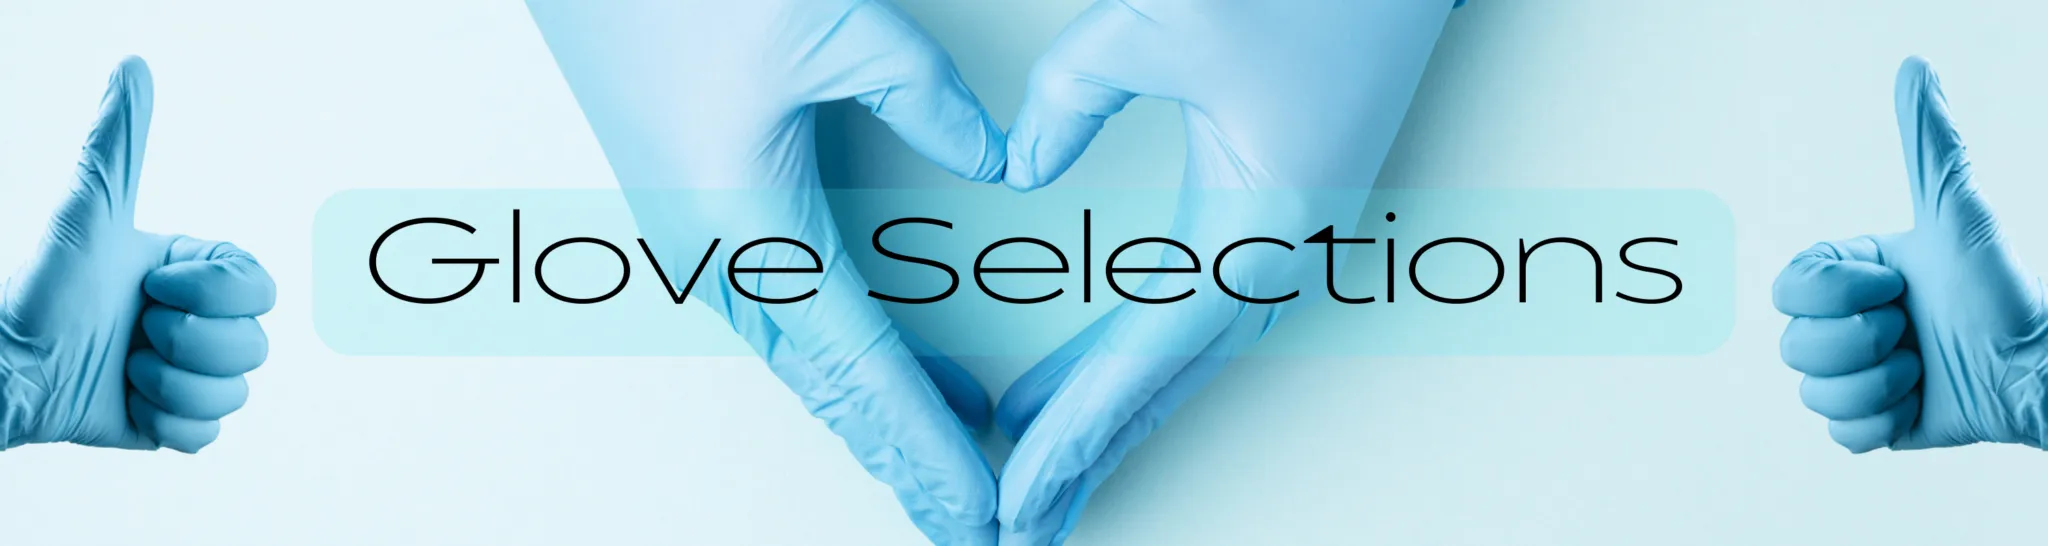 Glove-Selections-Banner-2048x546